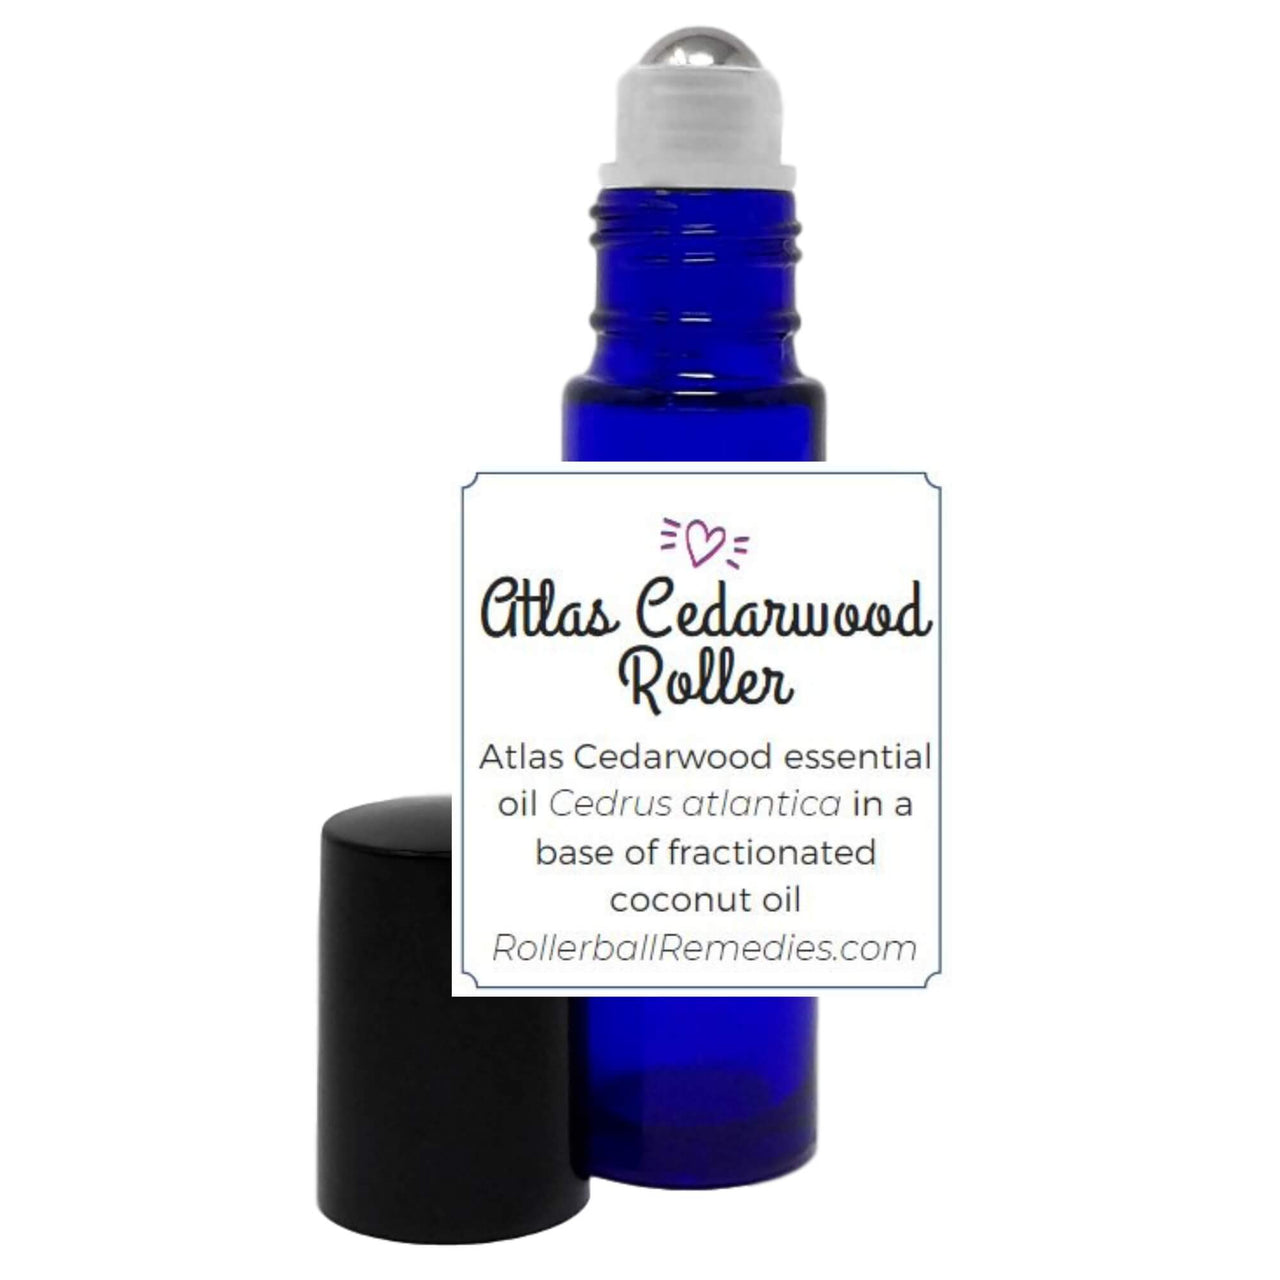 Atlas Cedarwood Essential Oil Roller Blend Review Quality of the Product